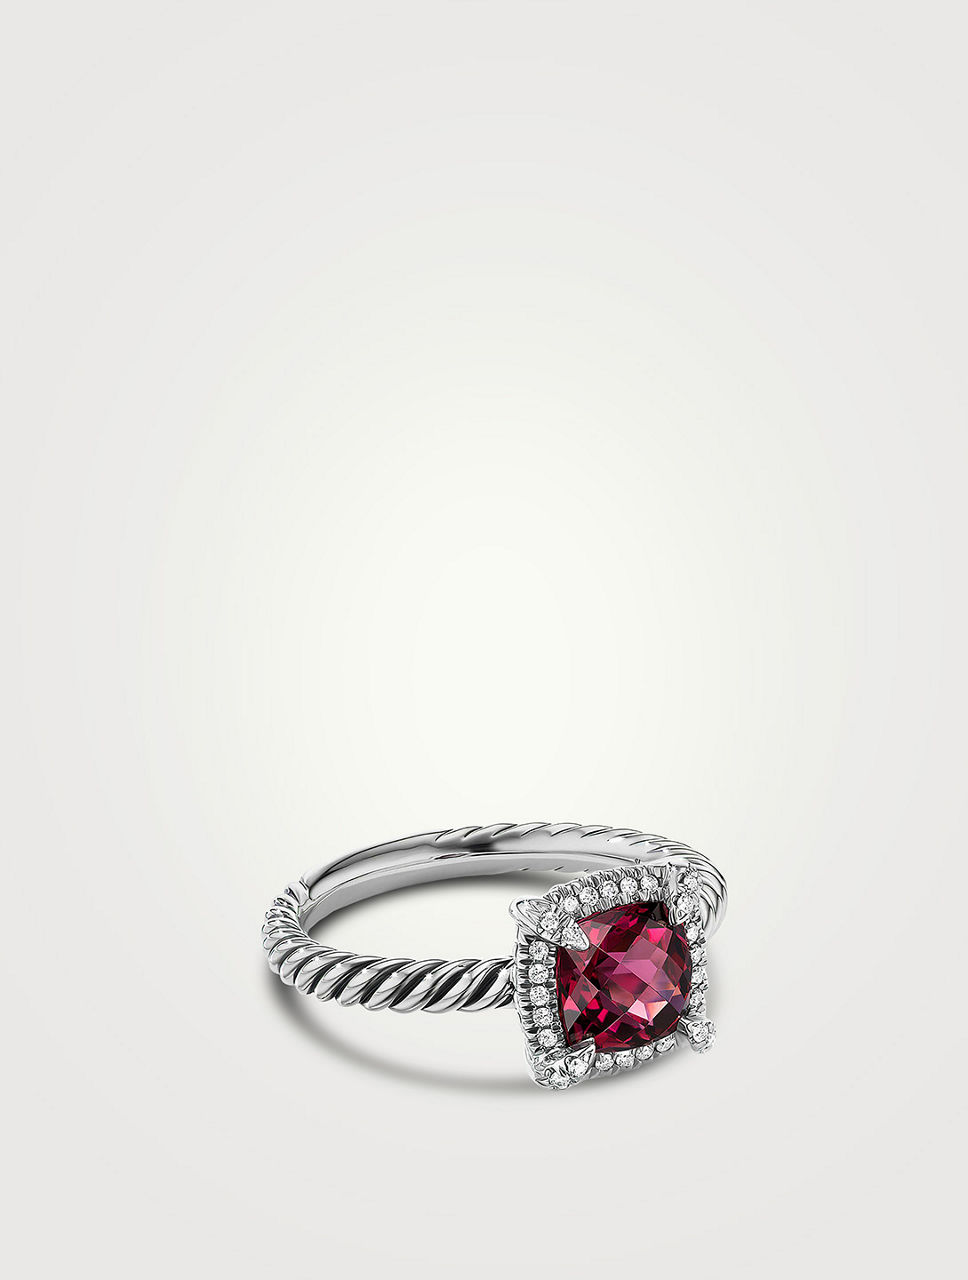 Petite Chatelaine® Pavé Bezel Ring Sterling Silver With Rhodolite Garnet And Diamonds